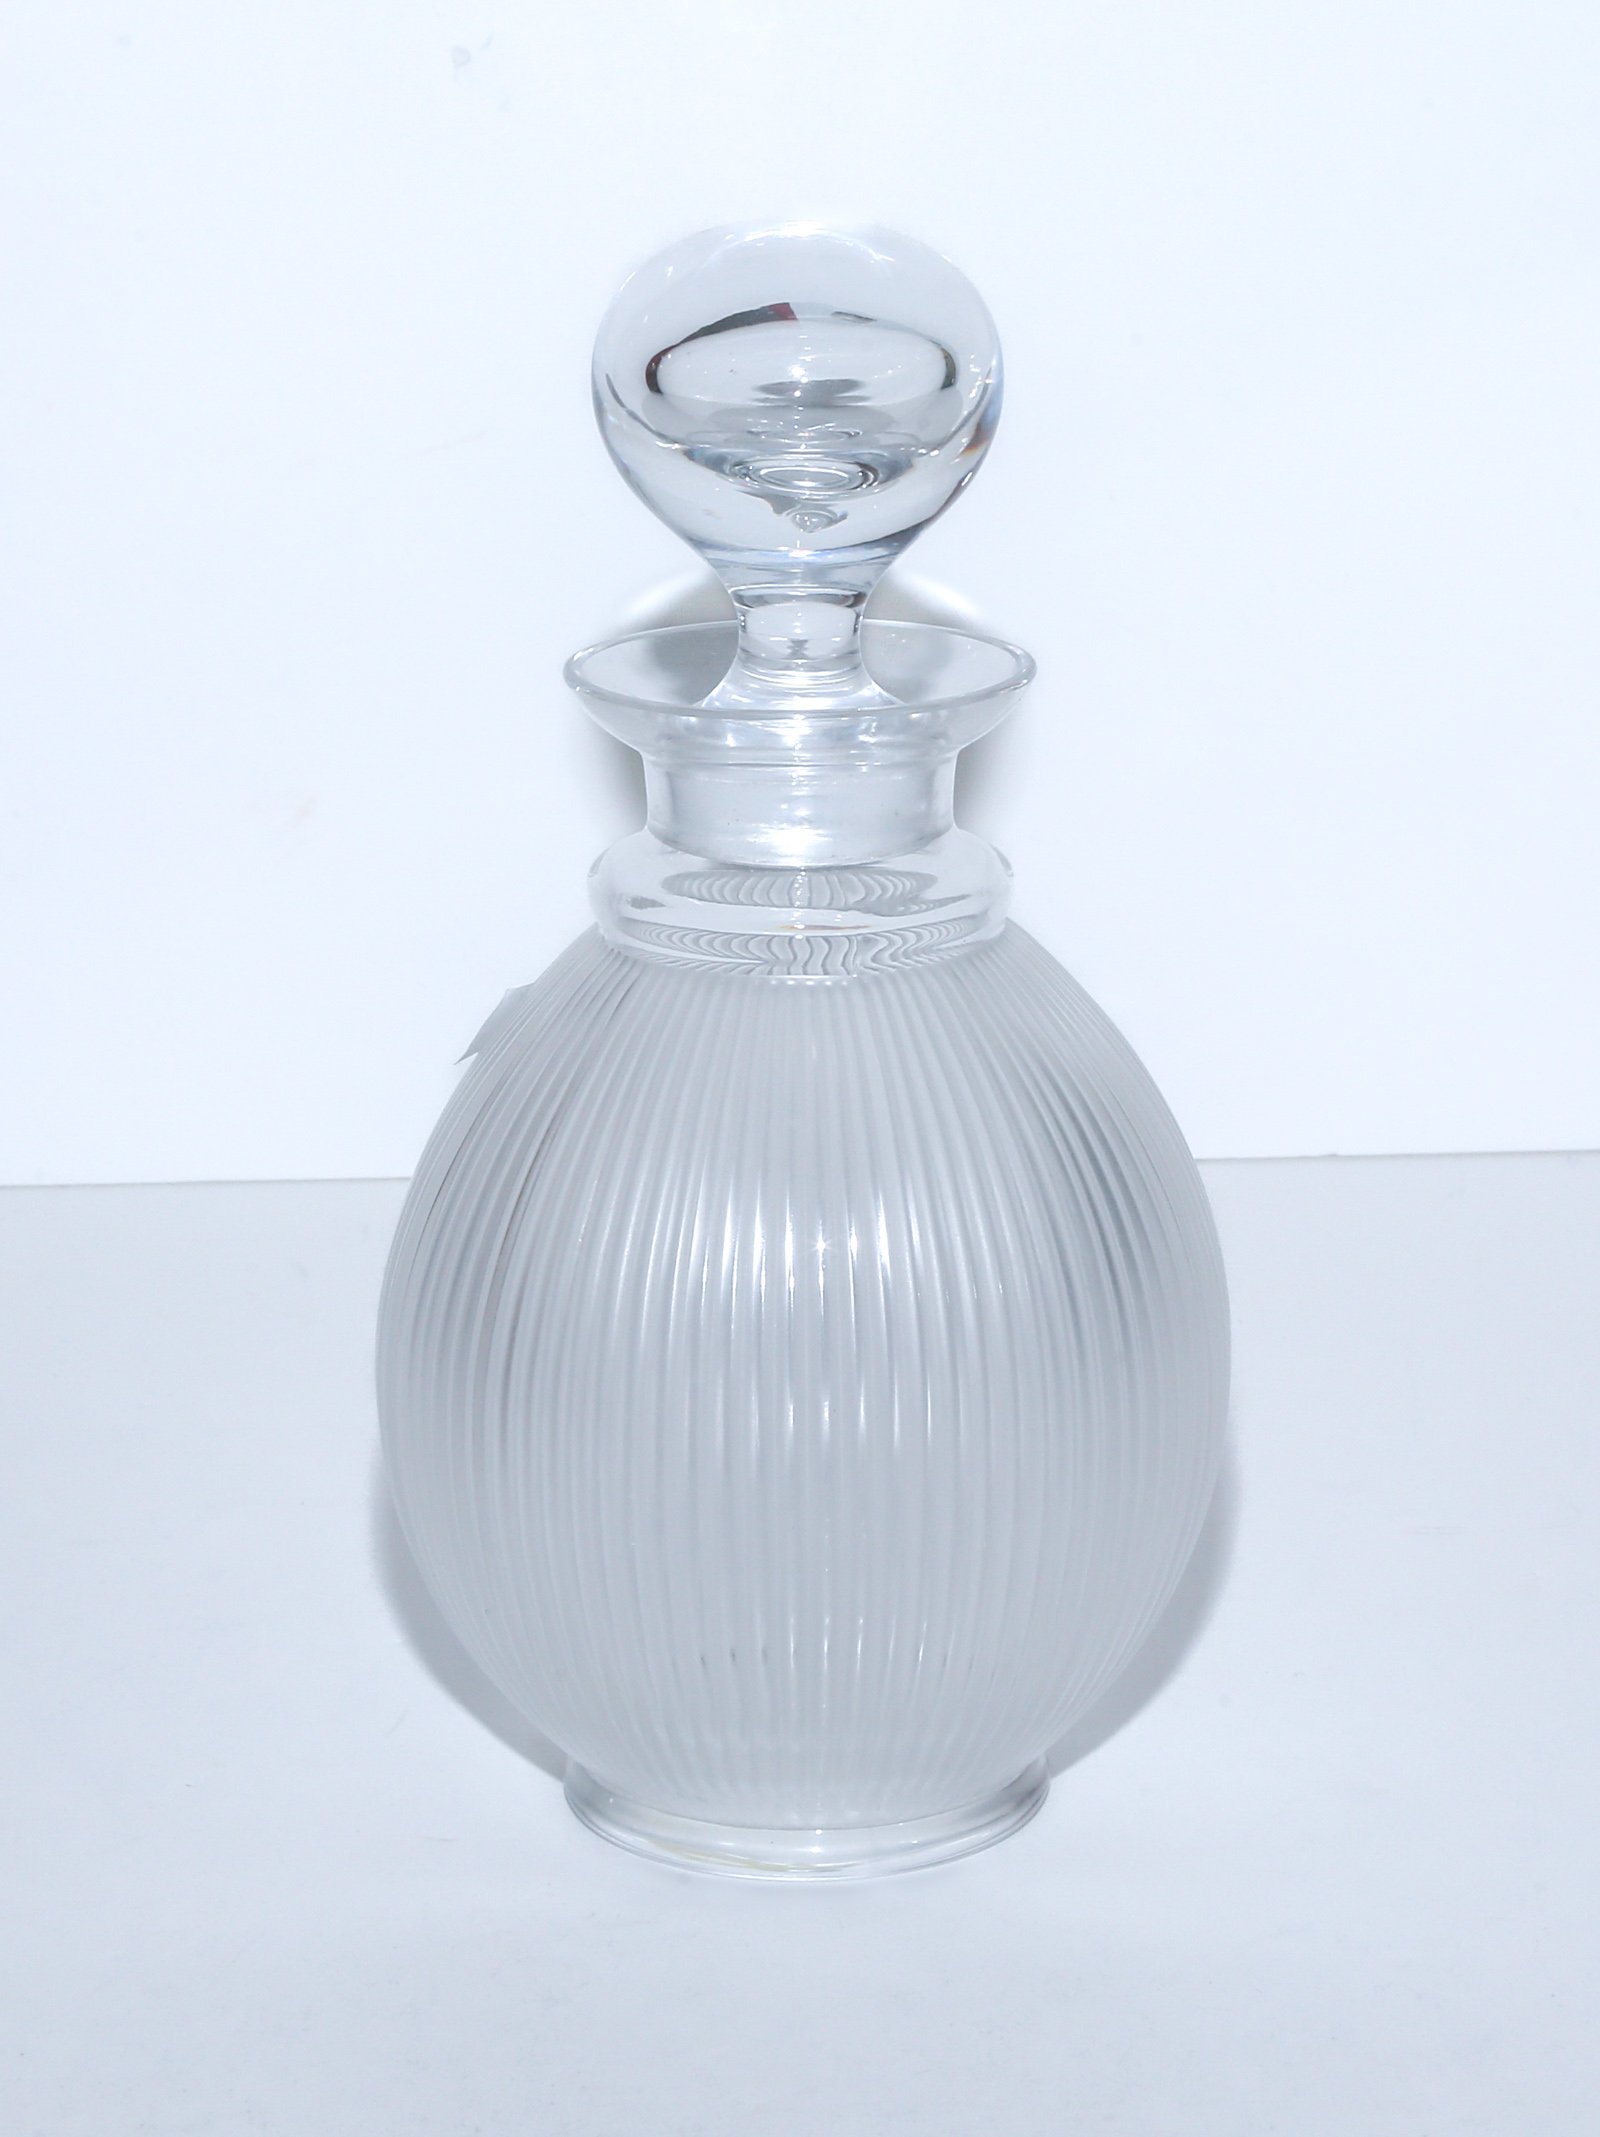 LALIQUE DECANTER 10 in. H.